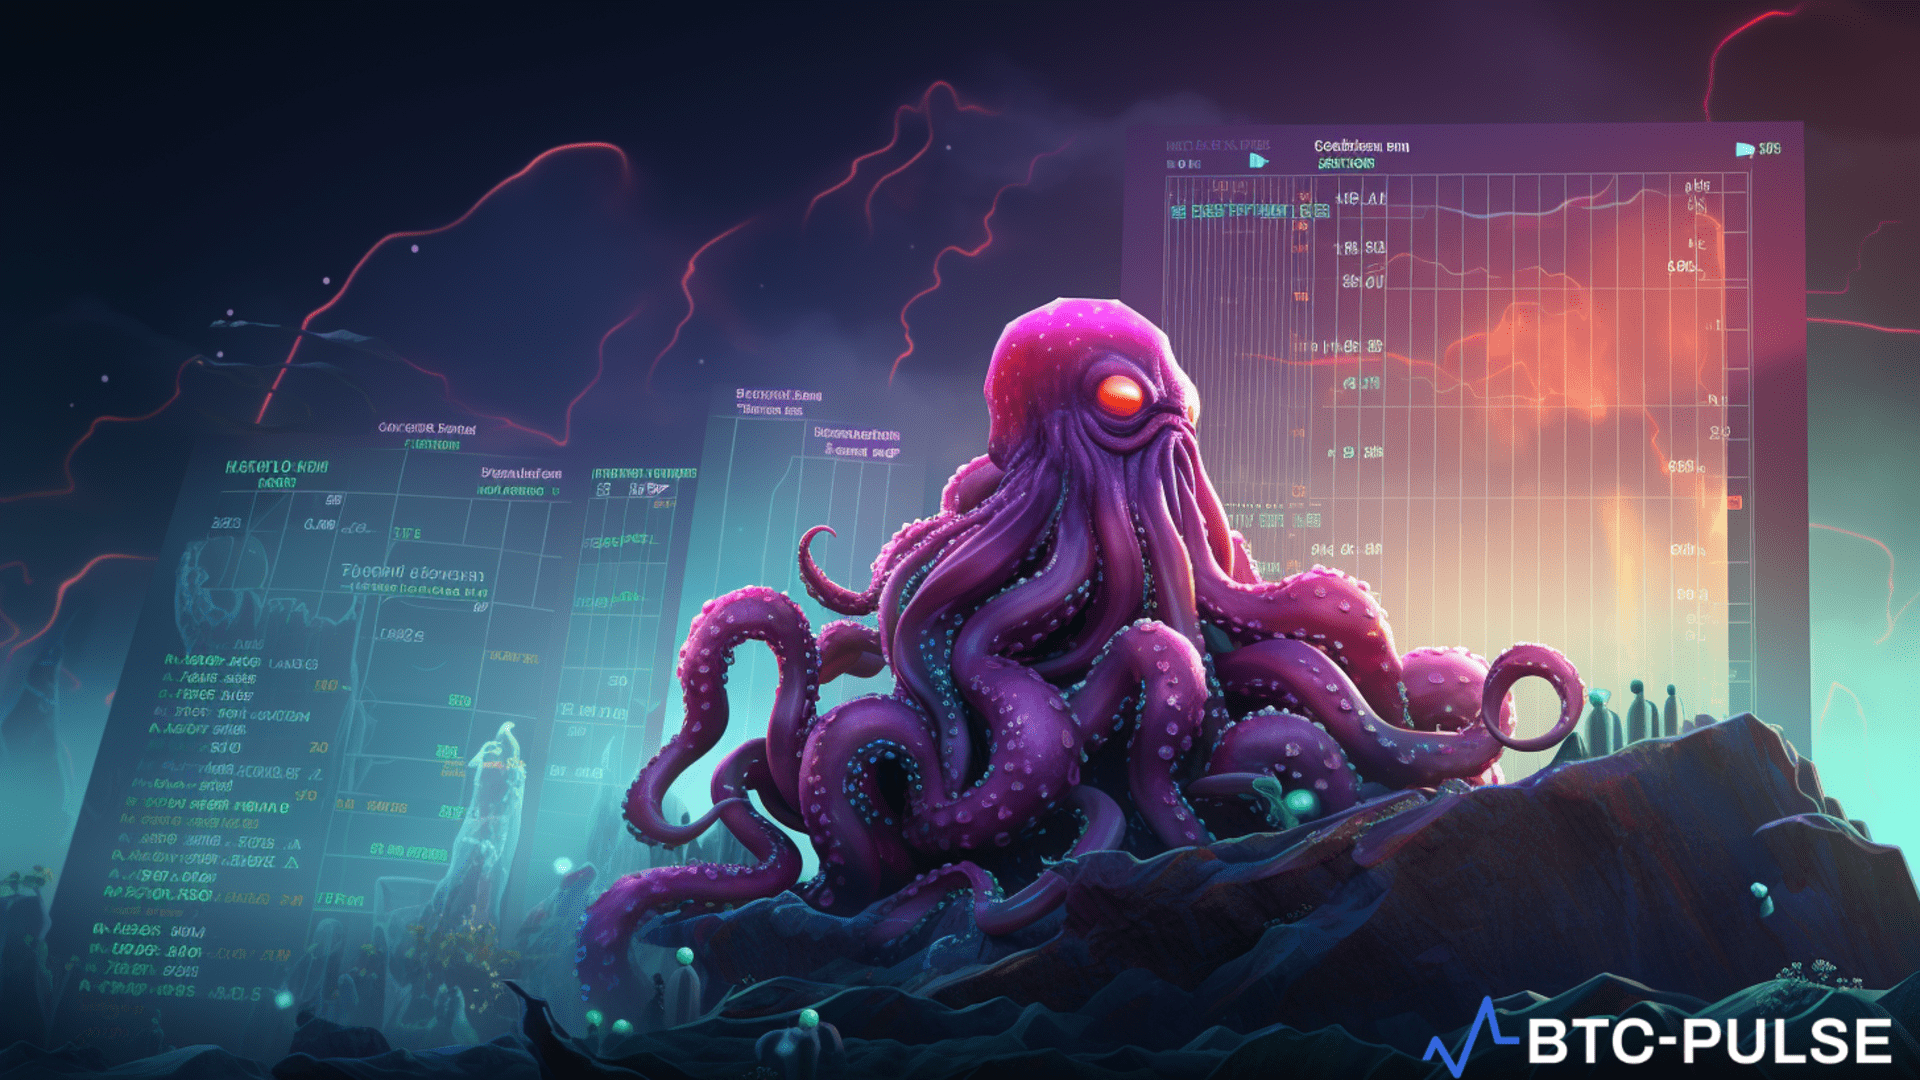 Kraken`s CF Benchmarks achieves a 50% market share in crypto ETFs, signaling major expansion and increased influence in global markets ahead.